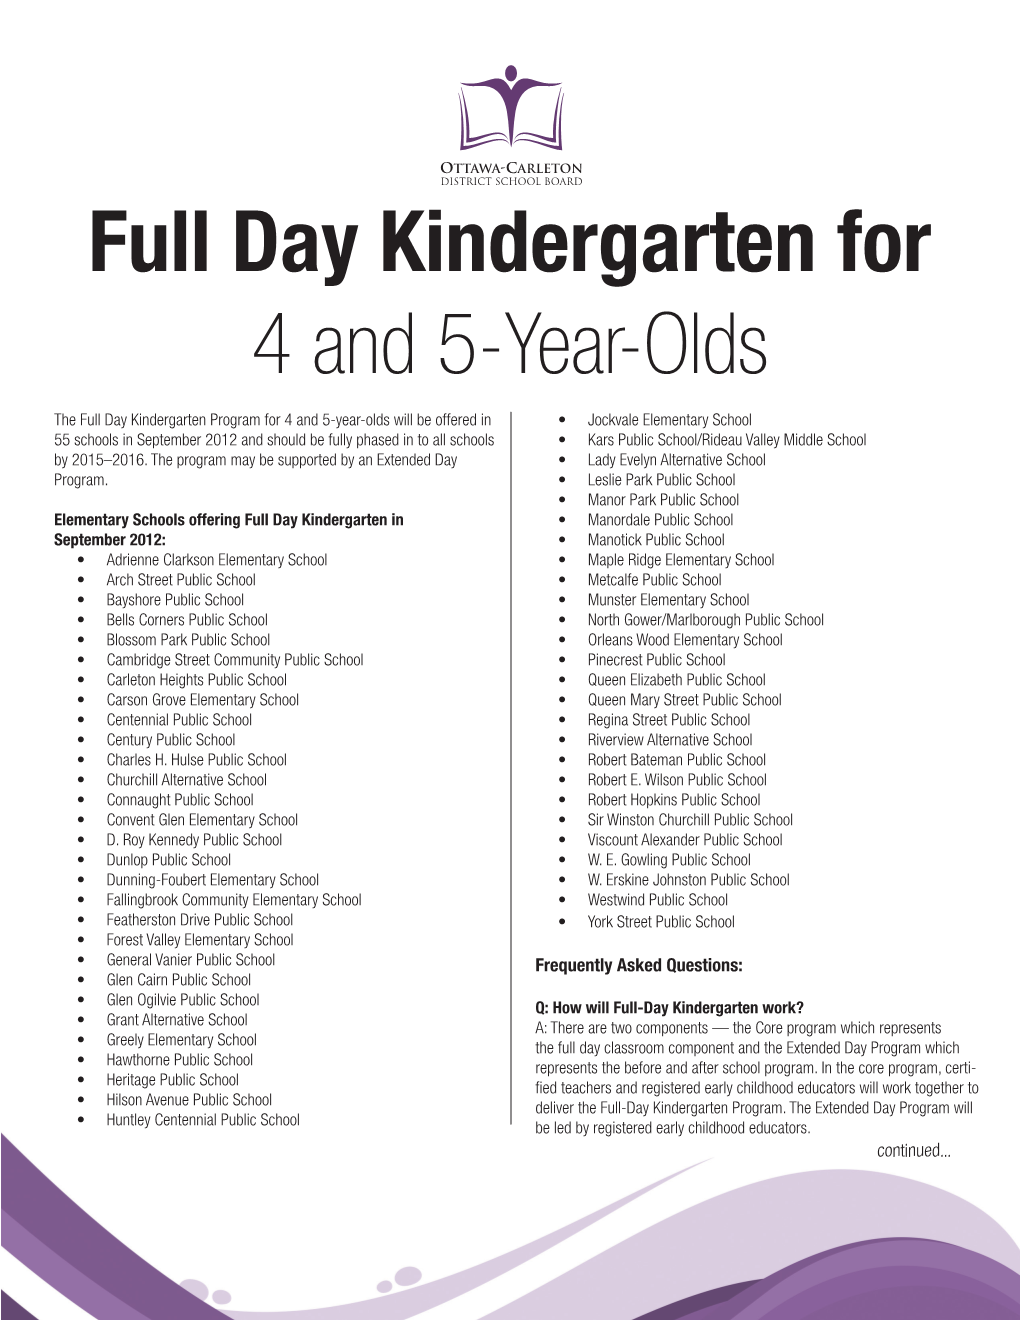 Full Day Kindergarten for 4 and 5-Year-Olds